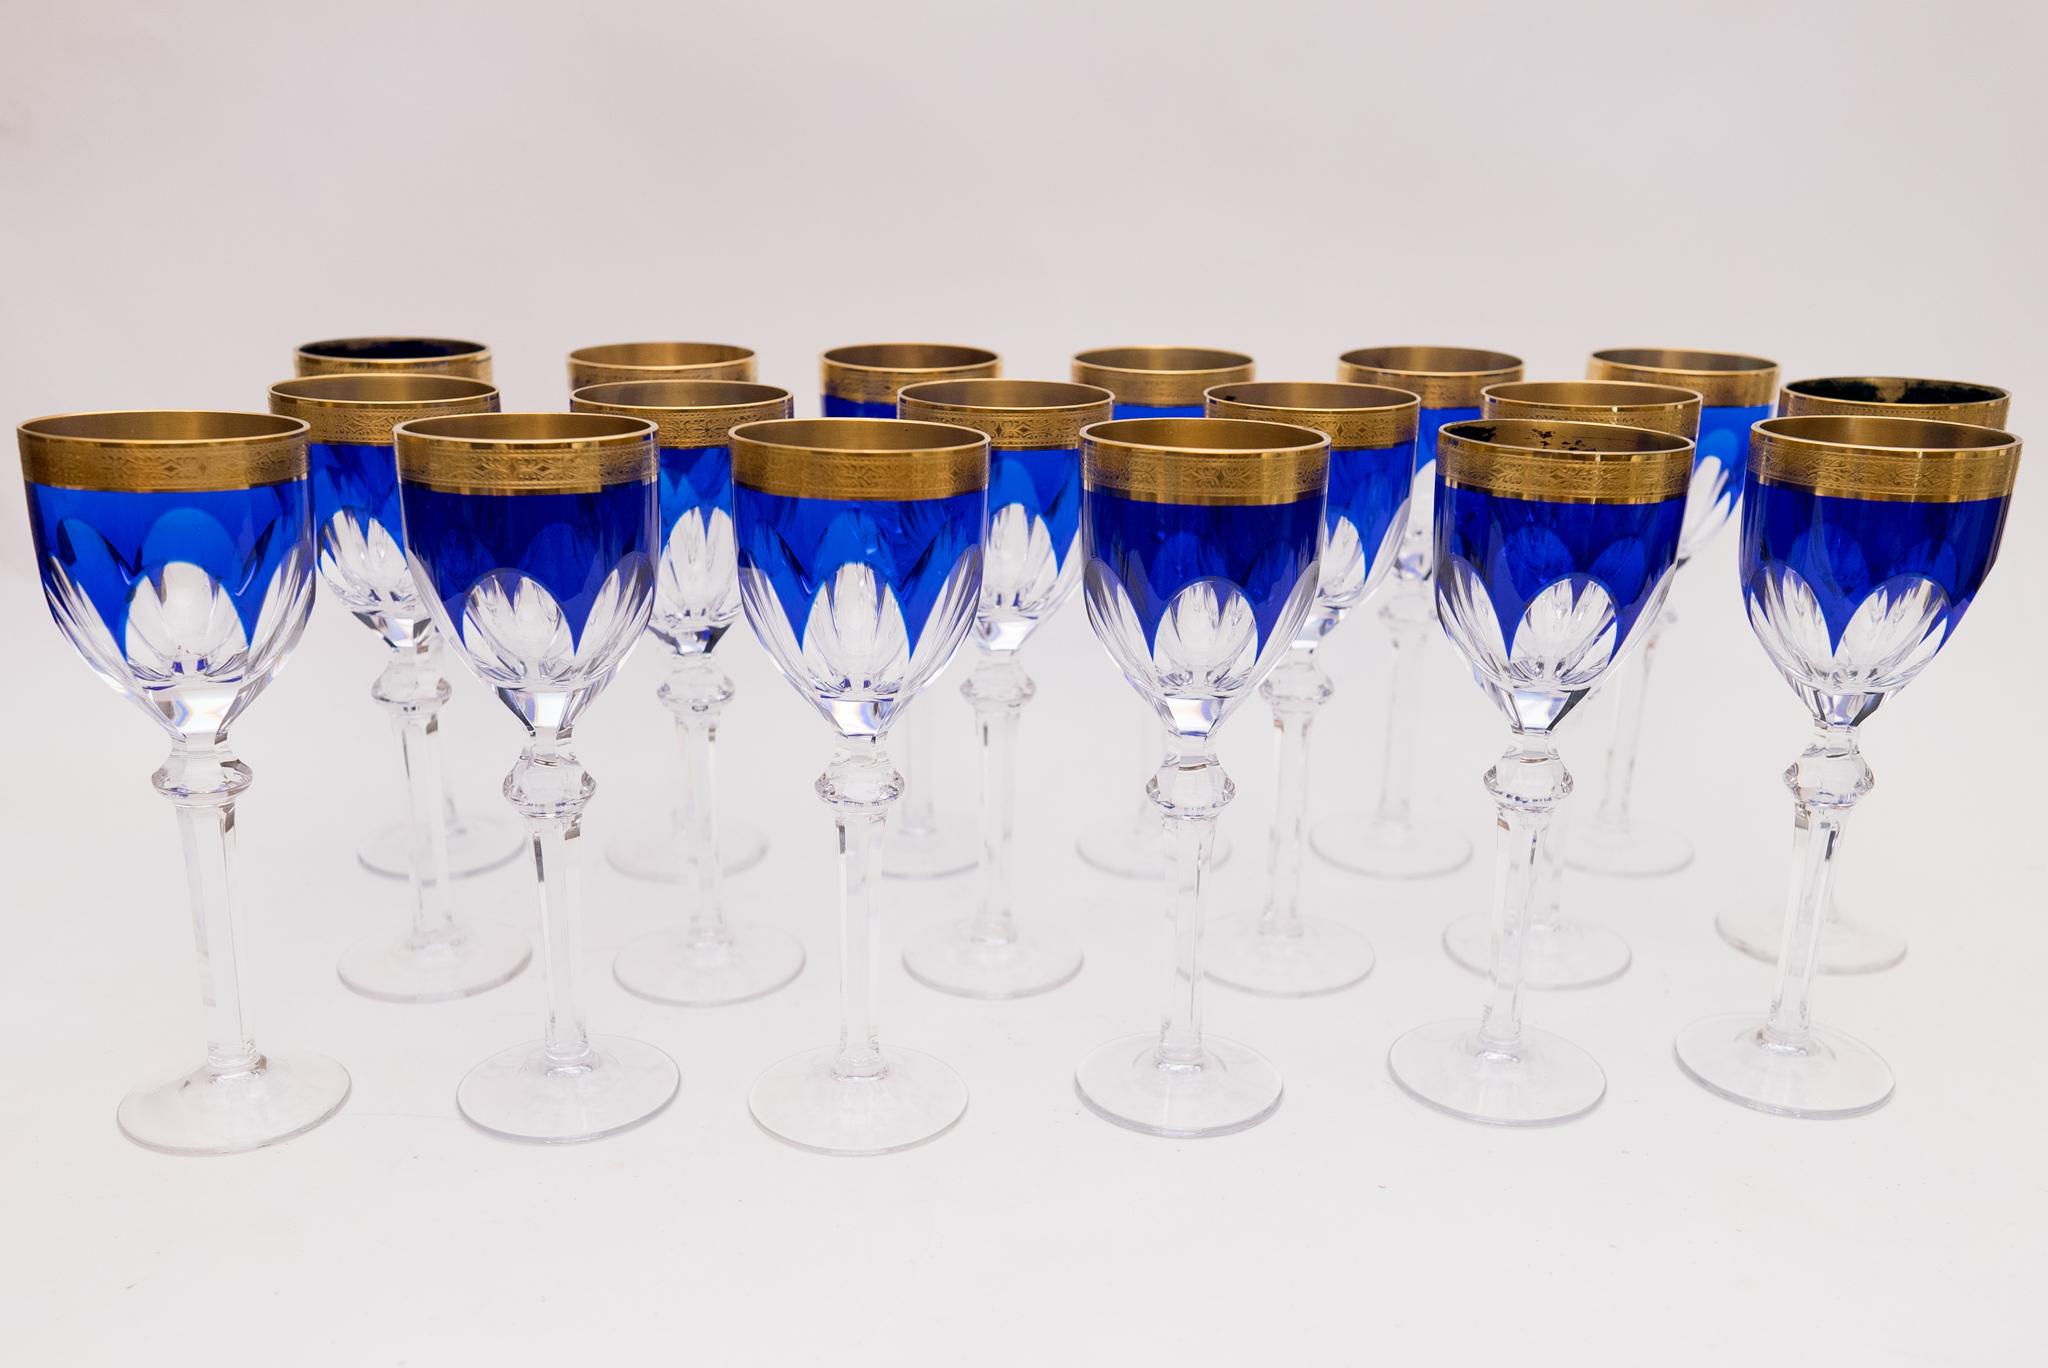 Early 20th Century 18 Antique Cobalt Blue Cut & Cased Crystal Goblets, 24 Karat Gold Bands, Tall